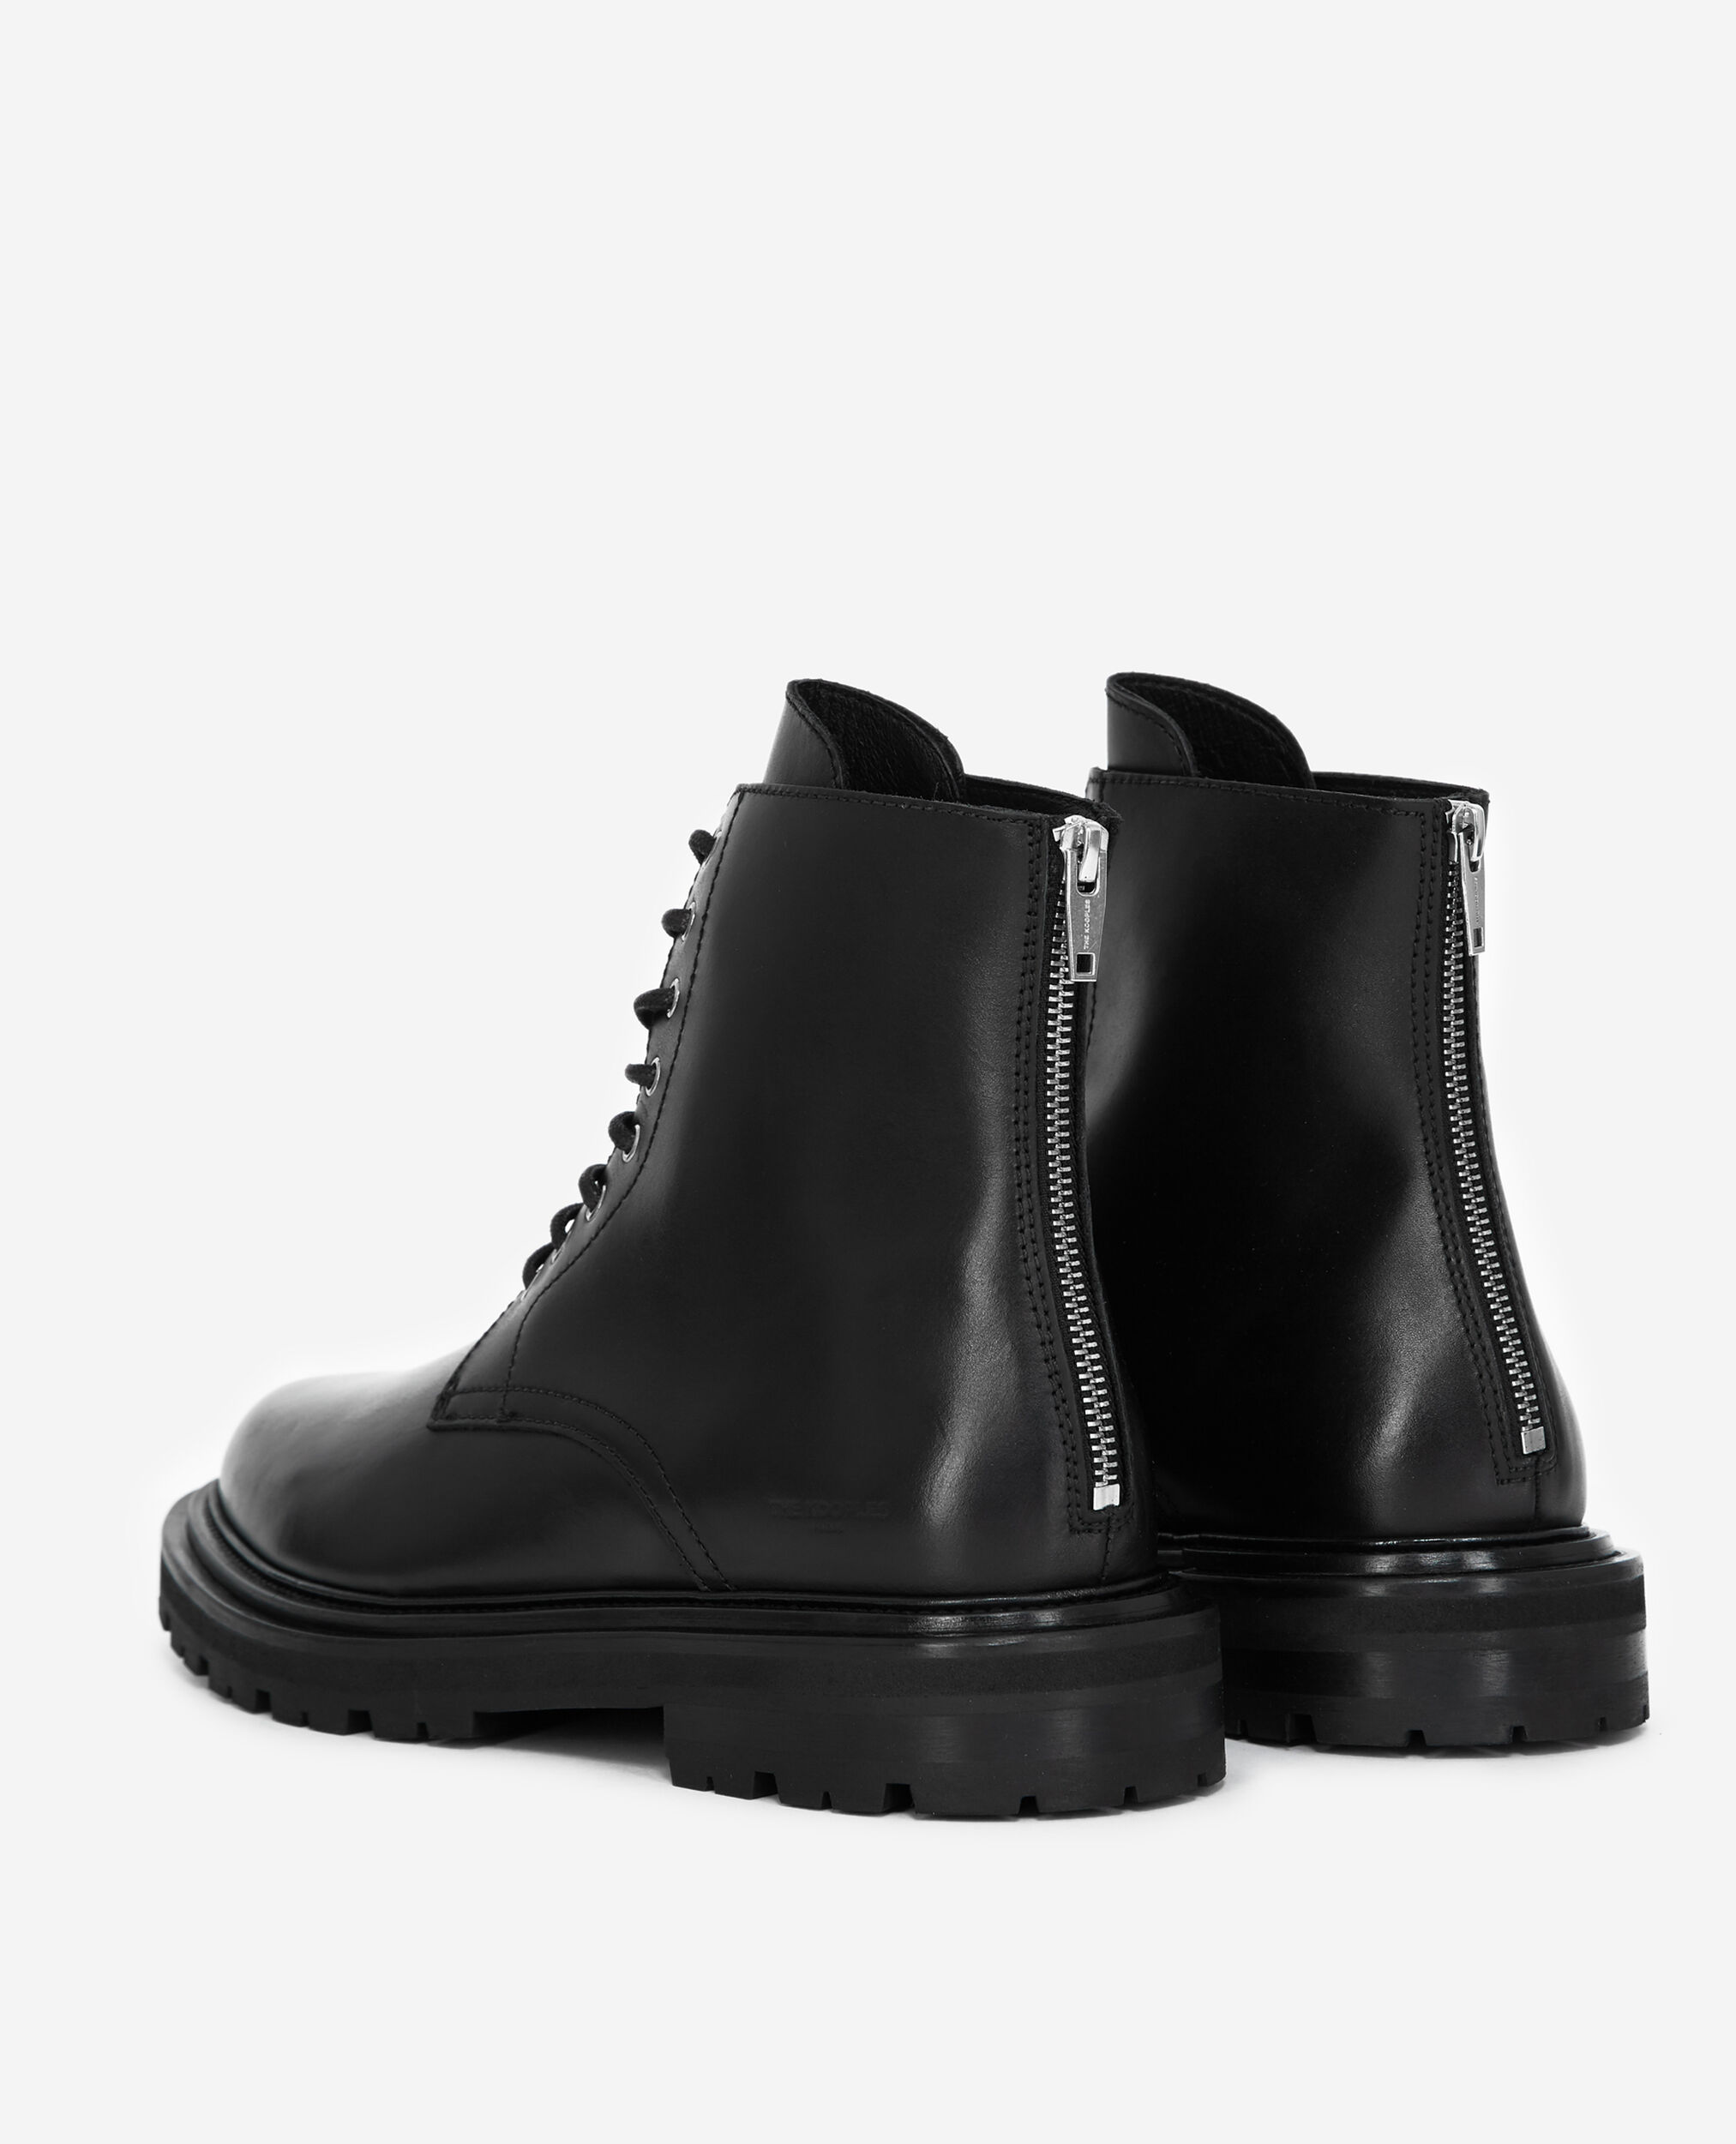 Black leather boots with thick sole, BLACK, hi-res image number null